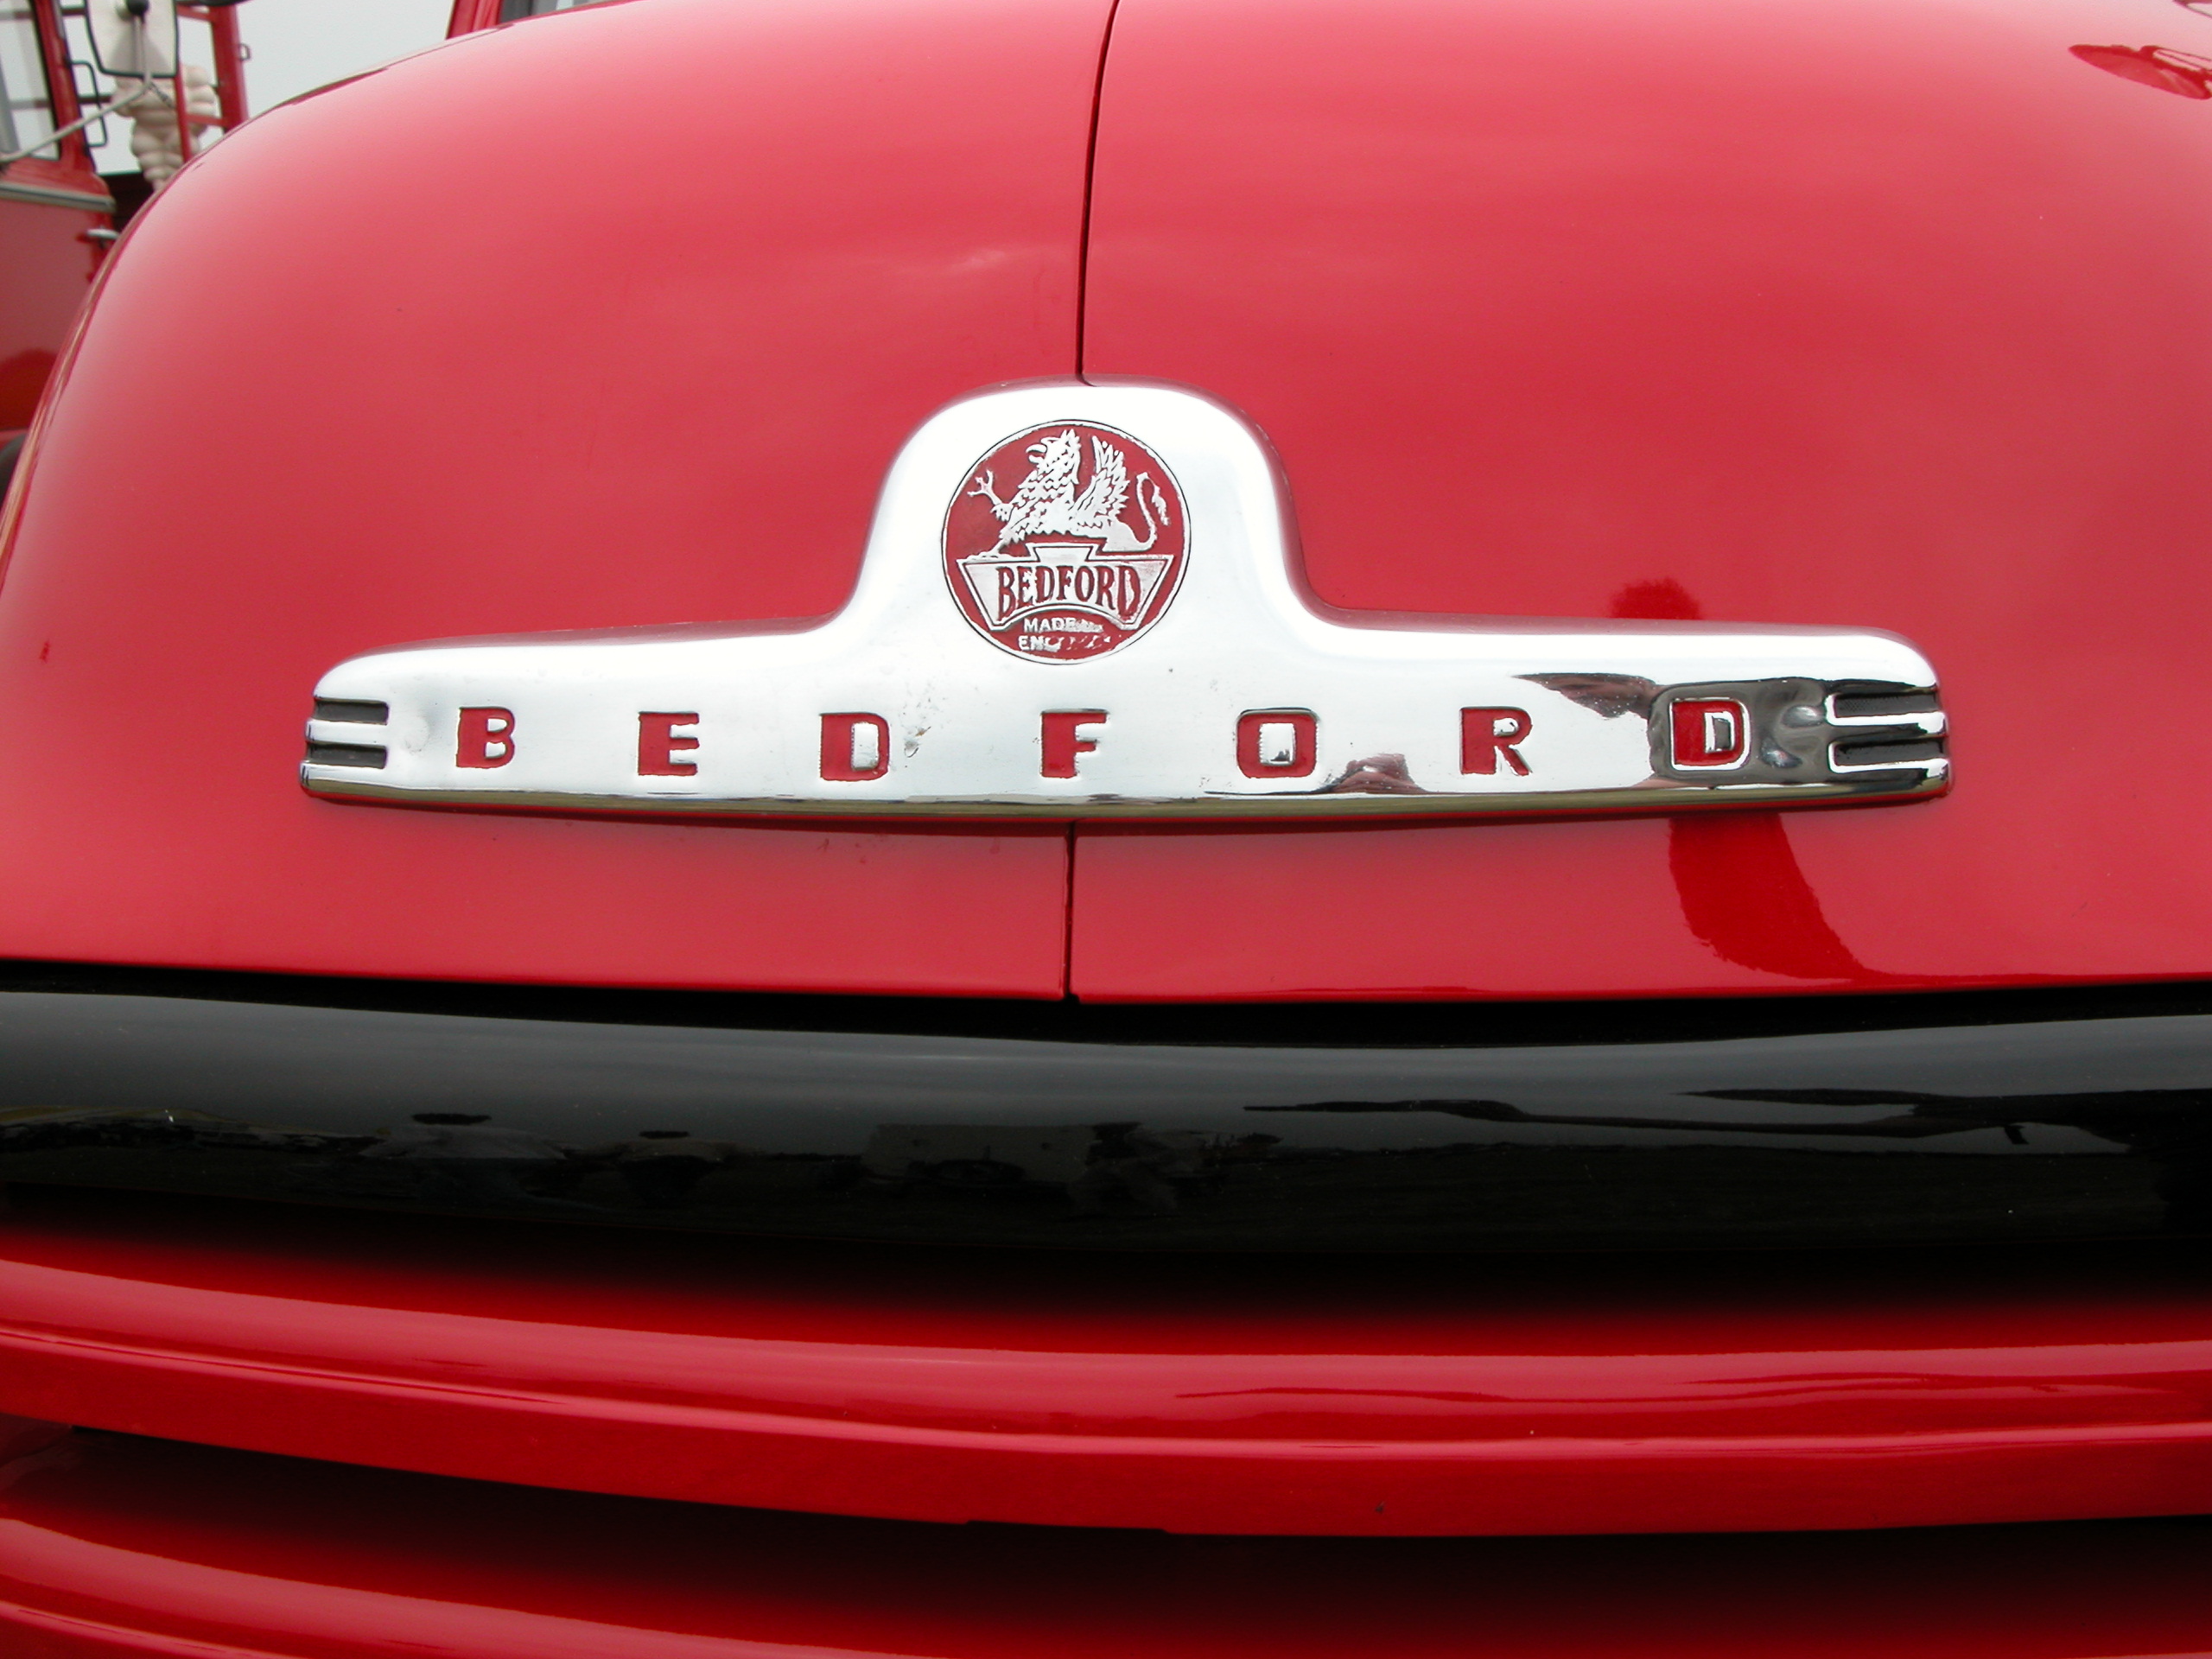 objects signs chrome brand logo bedford truck red firetruck